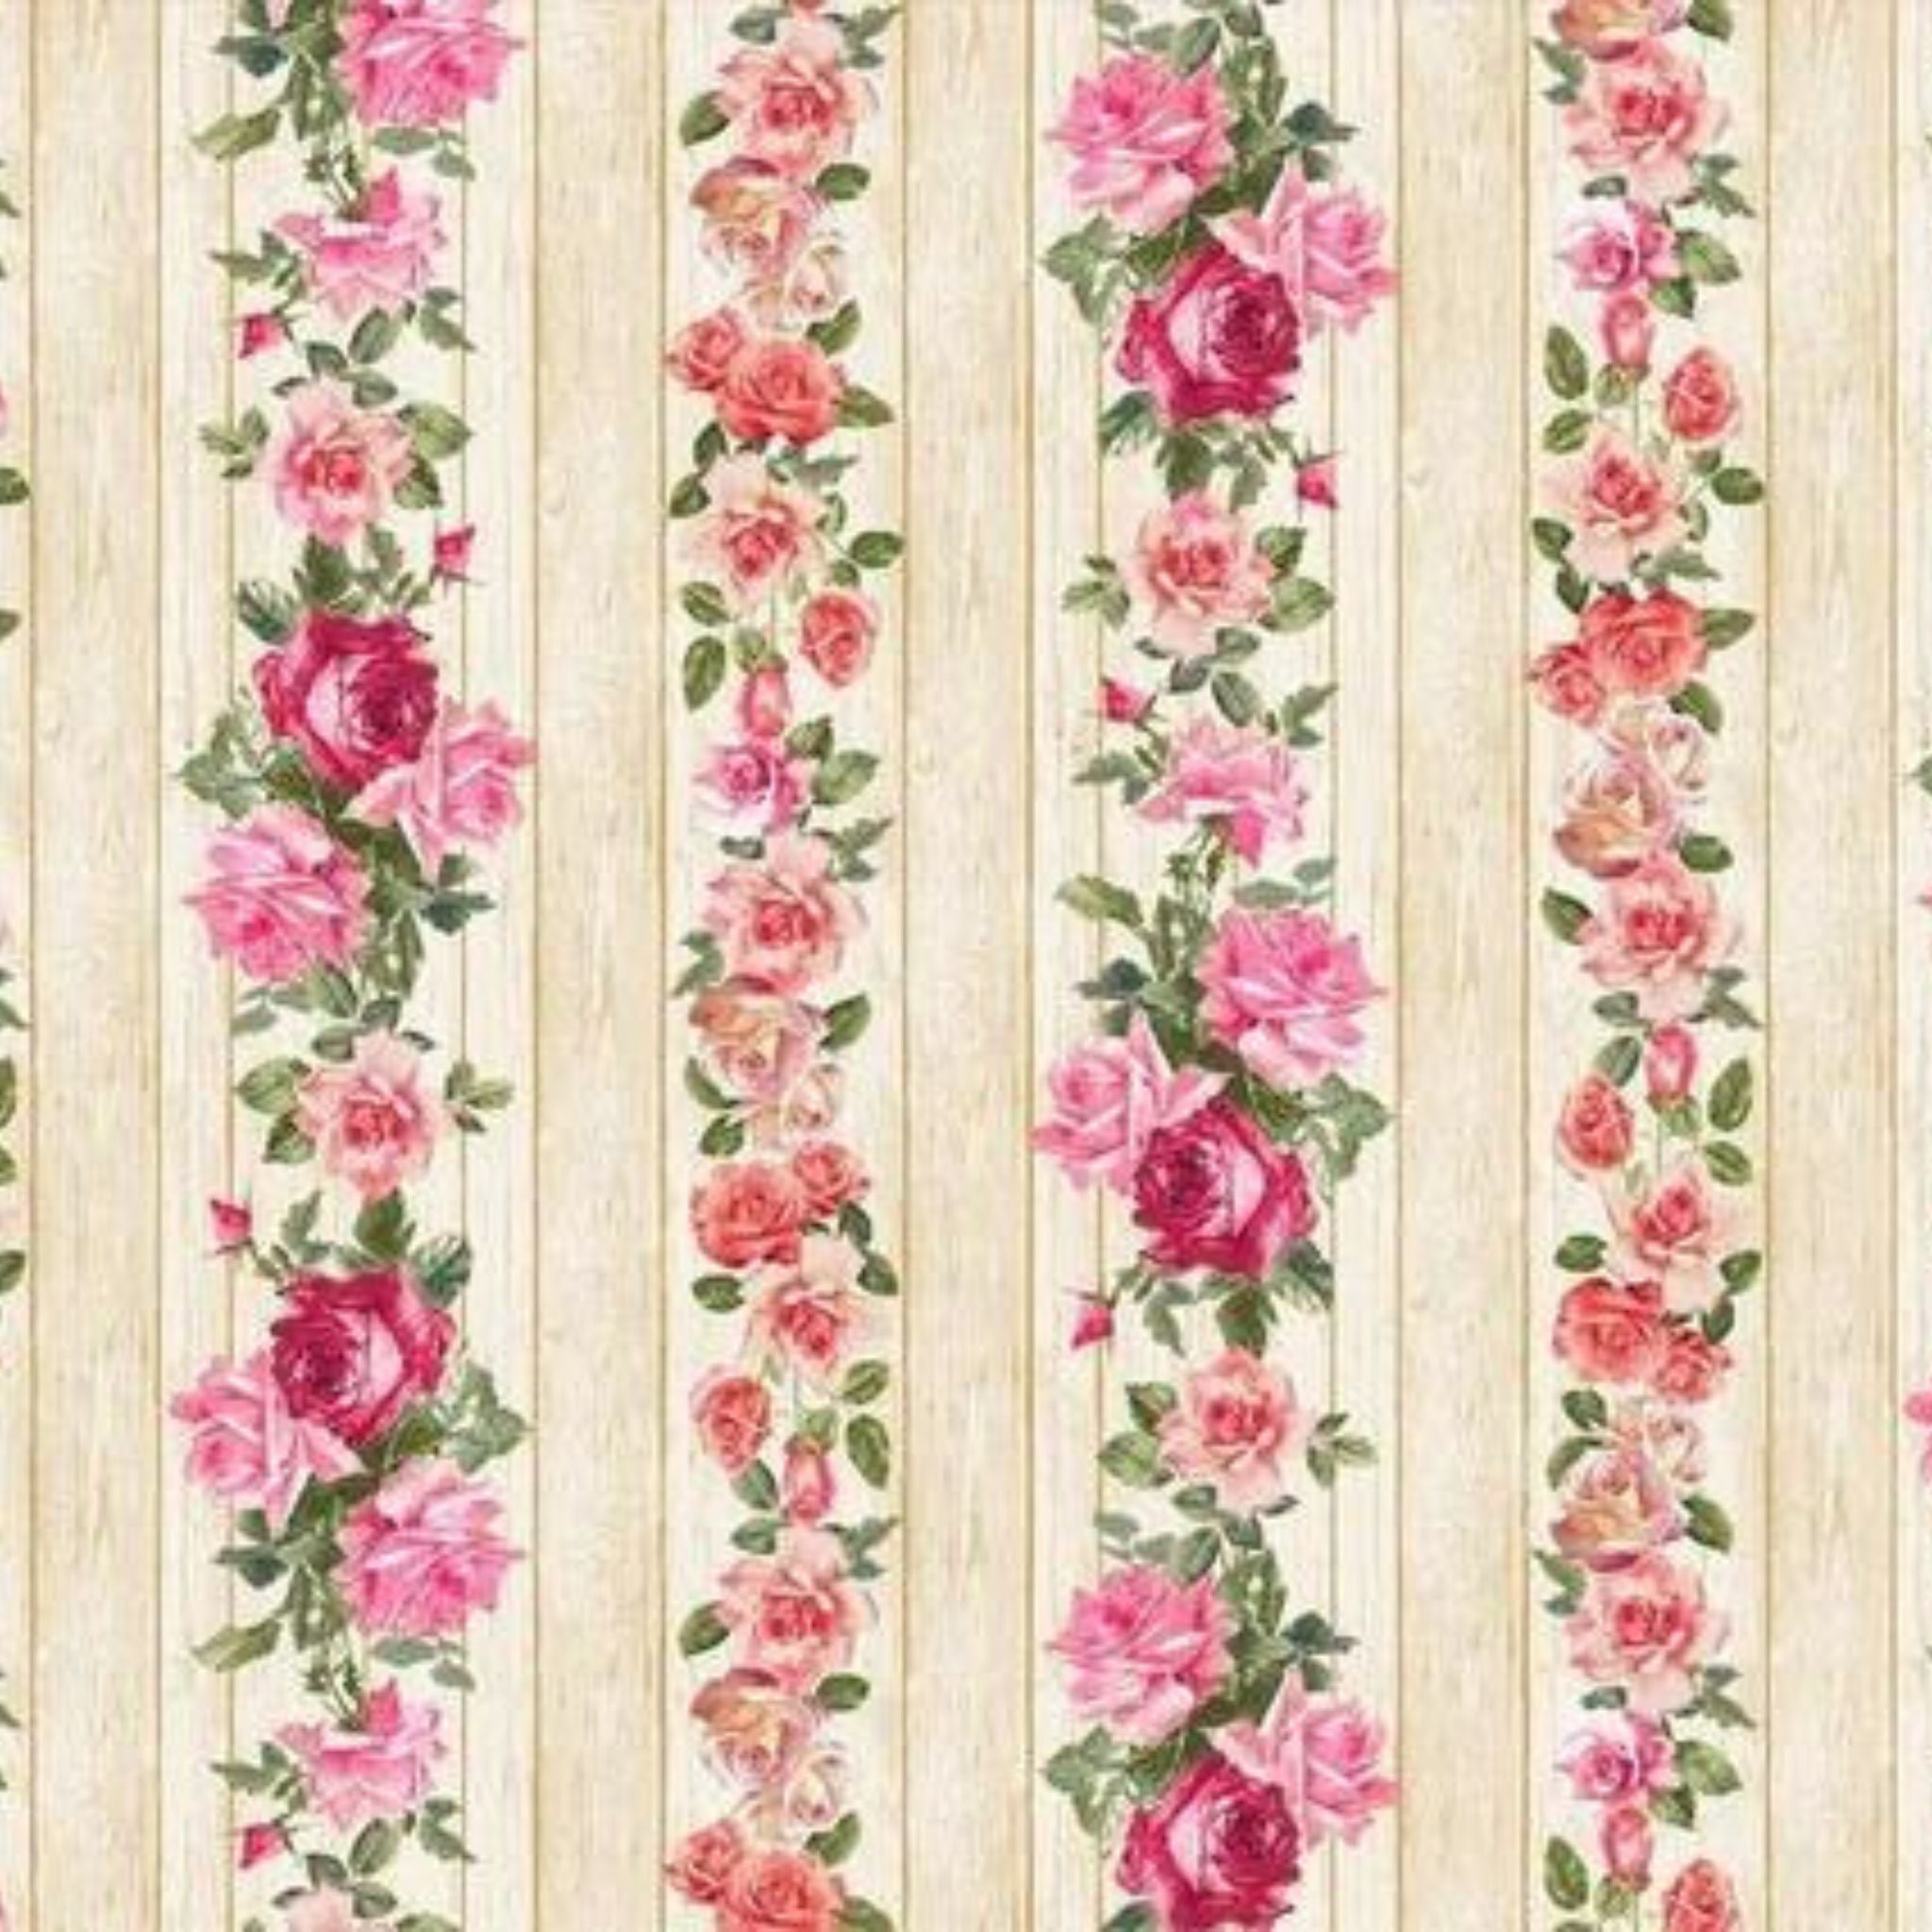 Large pink roses on a wood effect striped background cotton fabric - Rose by Timeless Treasure